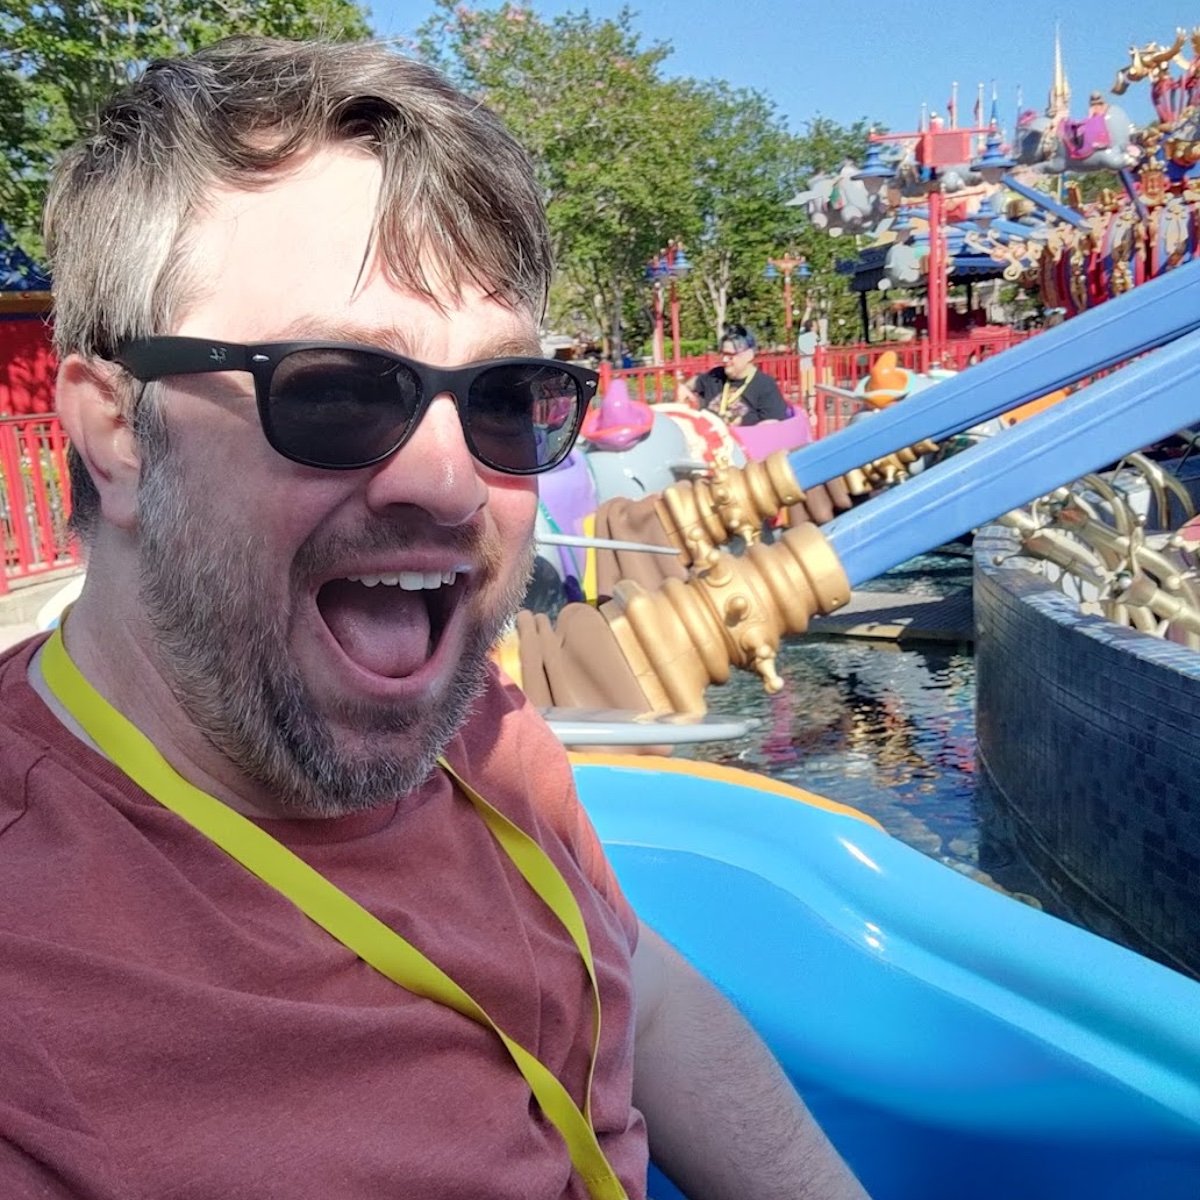 A goofy man with sunglasses smiling while riding Dumbo at Magic Kingdom